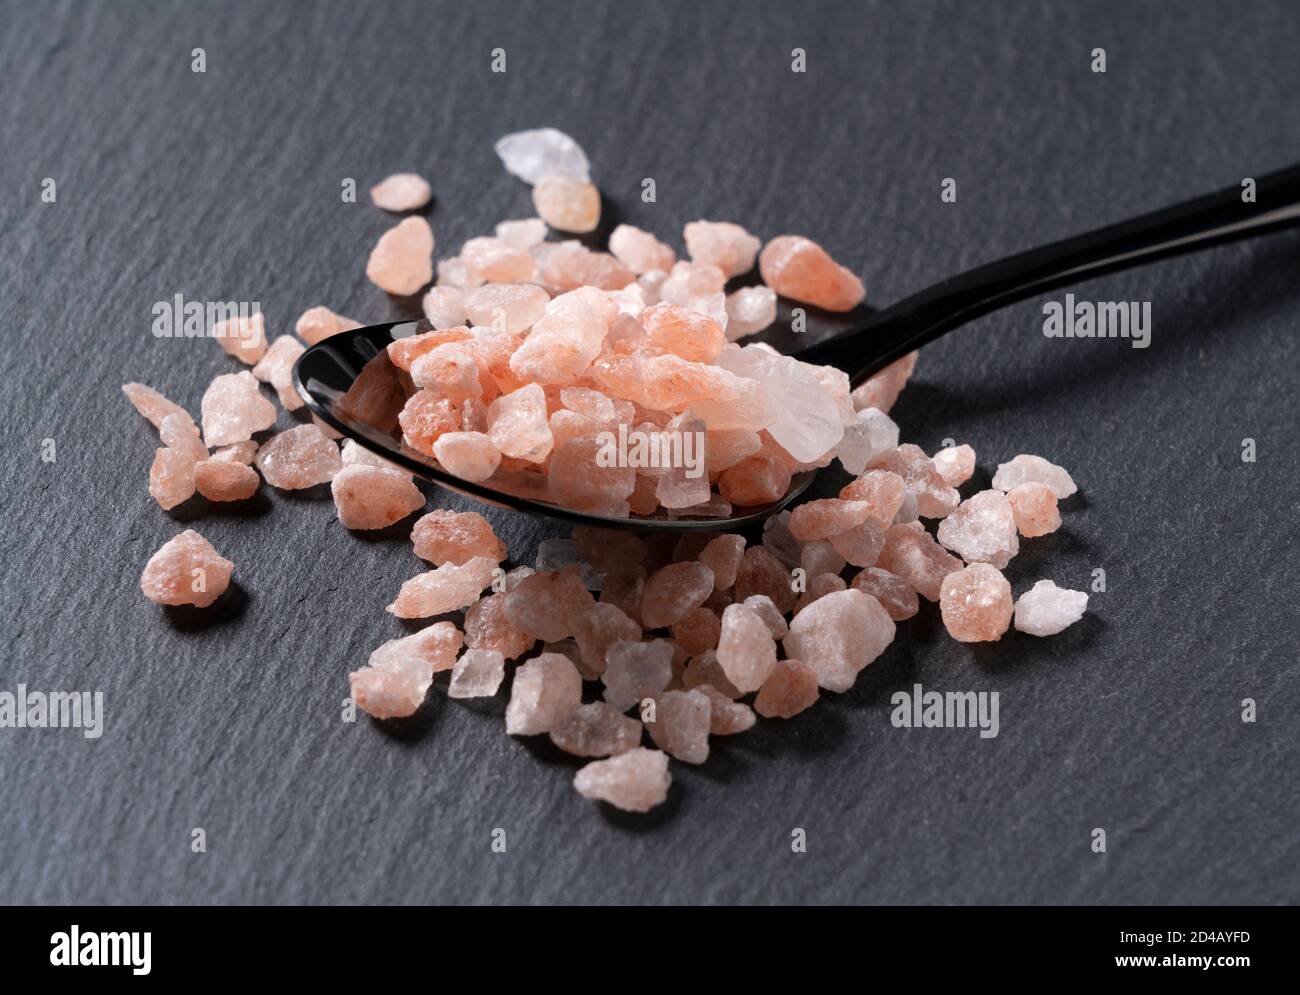 Angled shot of pink rock salt in a black spoon placed on a black background  Stock Photo - Alamy